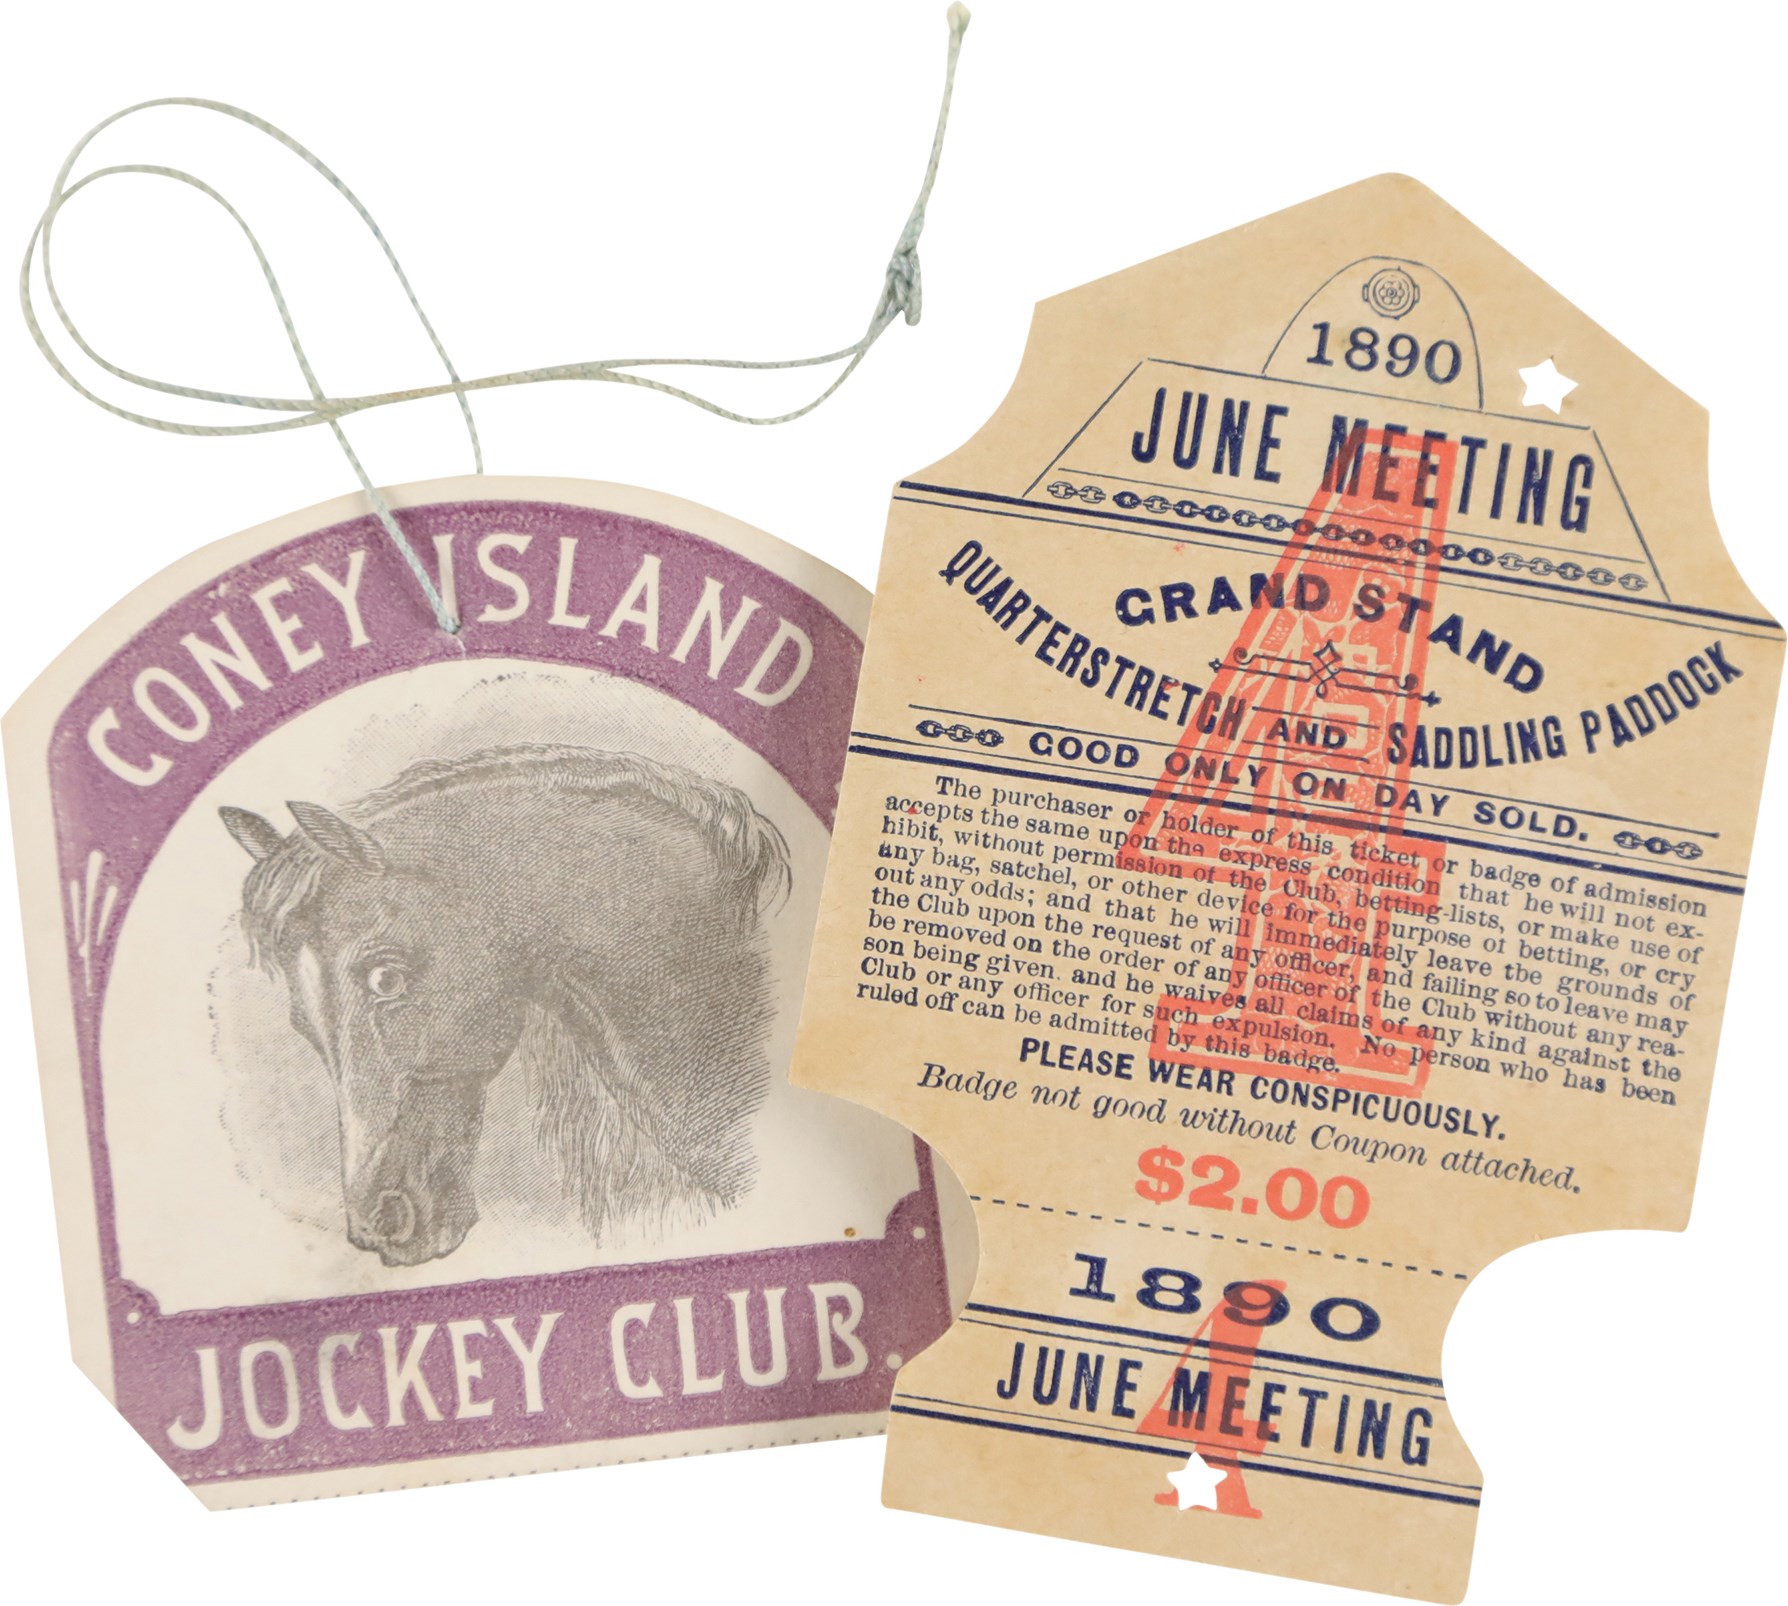 Horse Racing - Hall of Fame Champion Horses Admission Badges: Hindoo And Firenze (2)